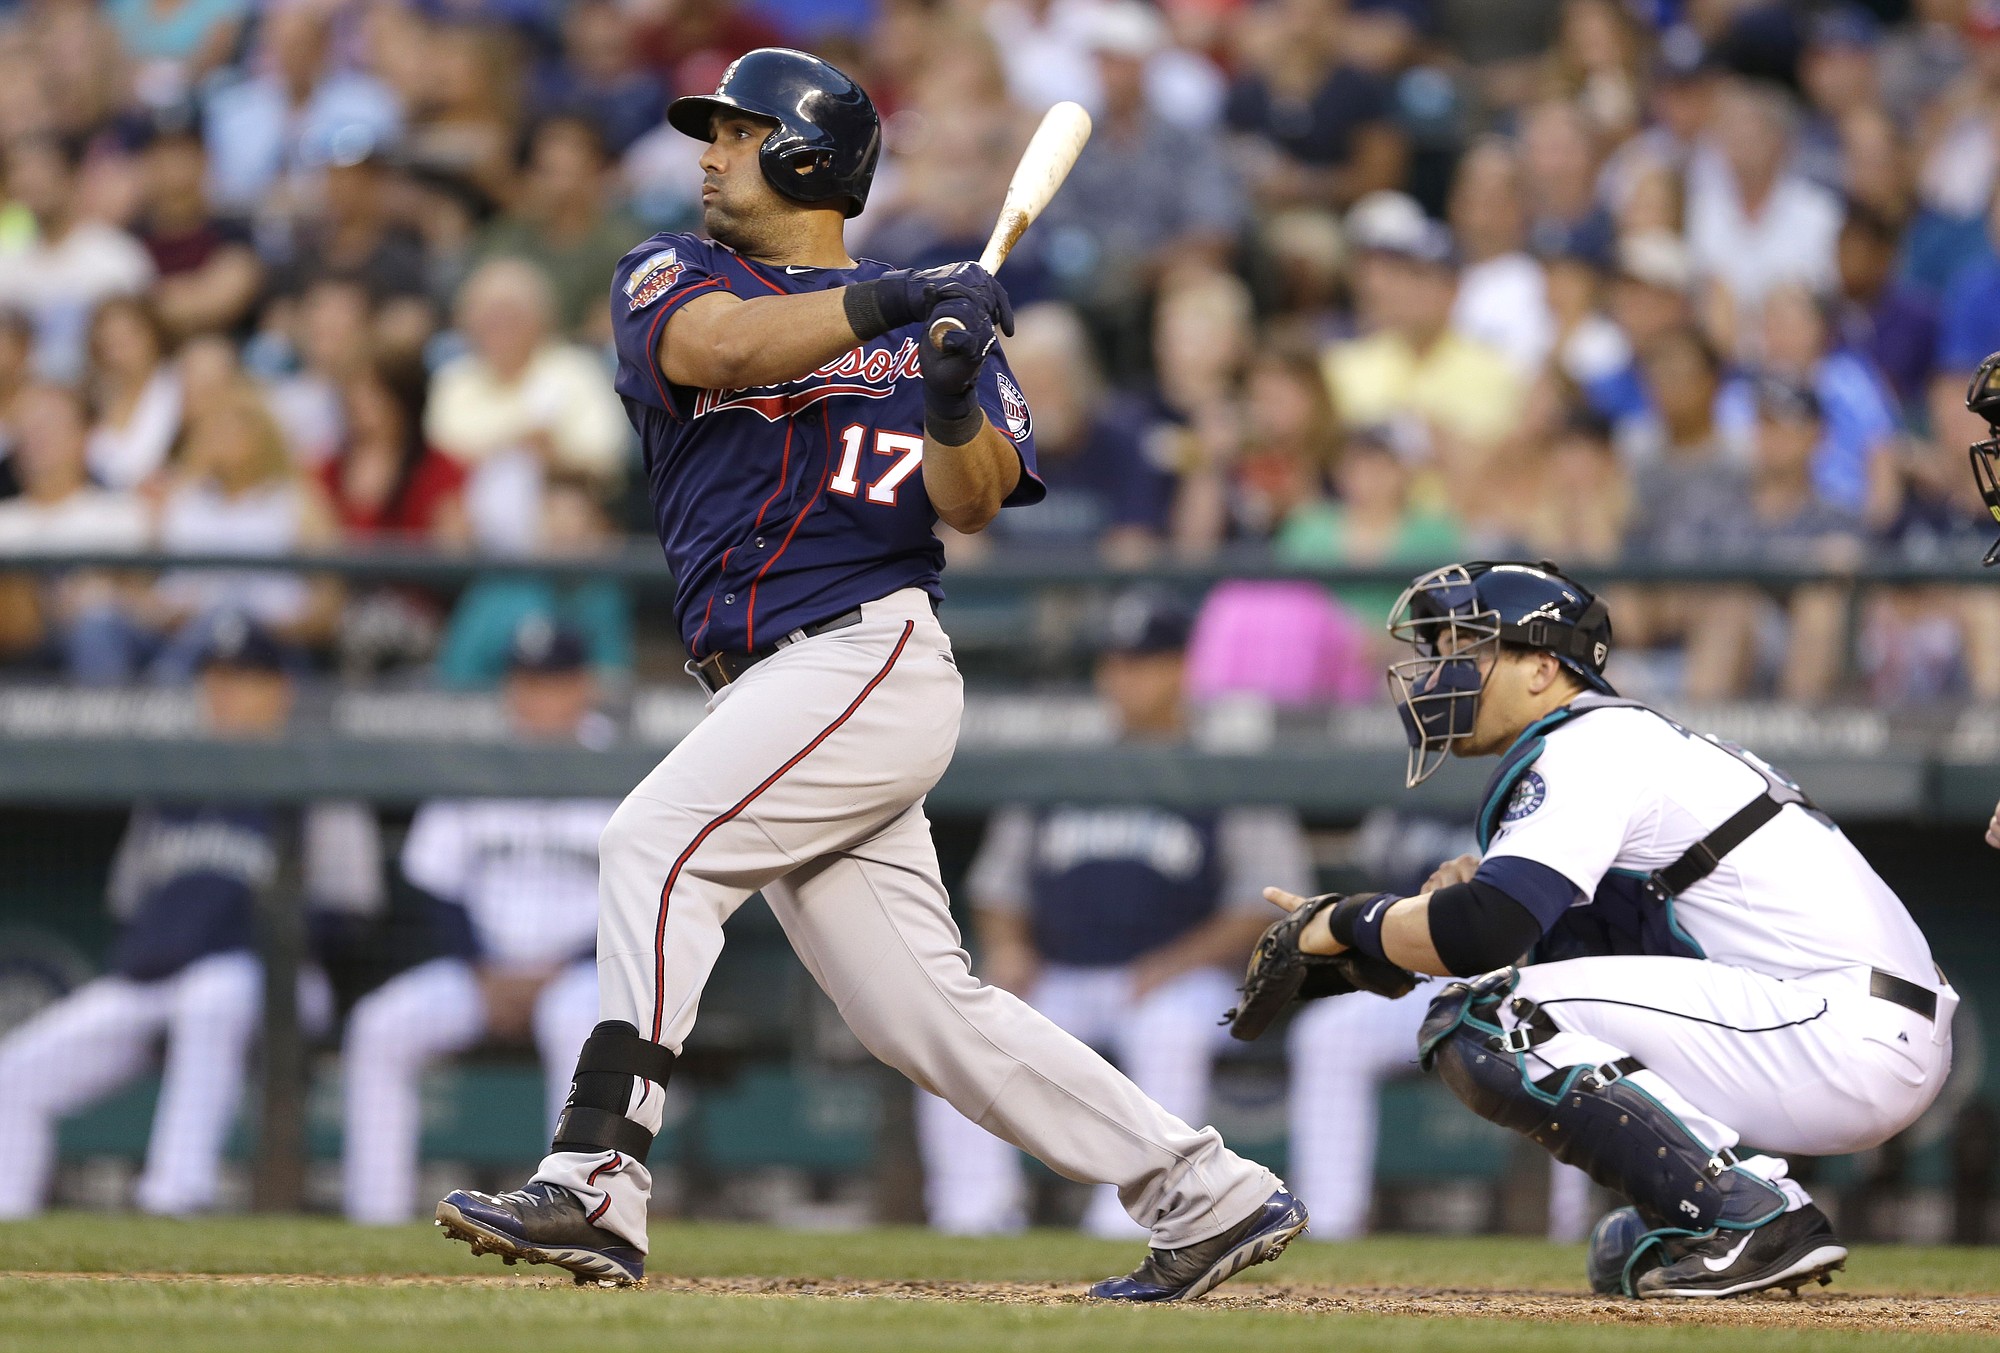 Minnesota Twins designated hitter Kendrys Morales (17) hits a two-run double in the fifth inning of a baseball game against the Seattle Mariners, earlier this season in Seattle.